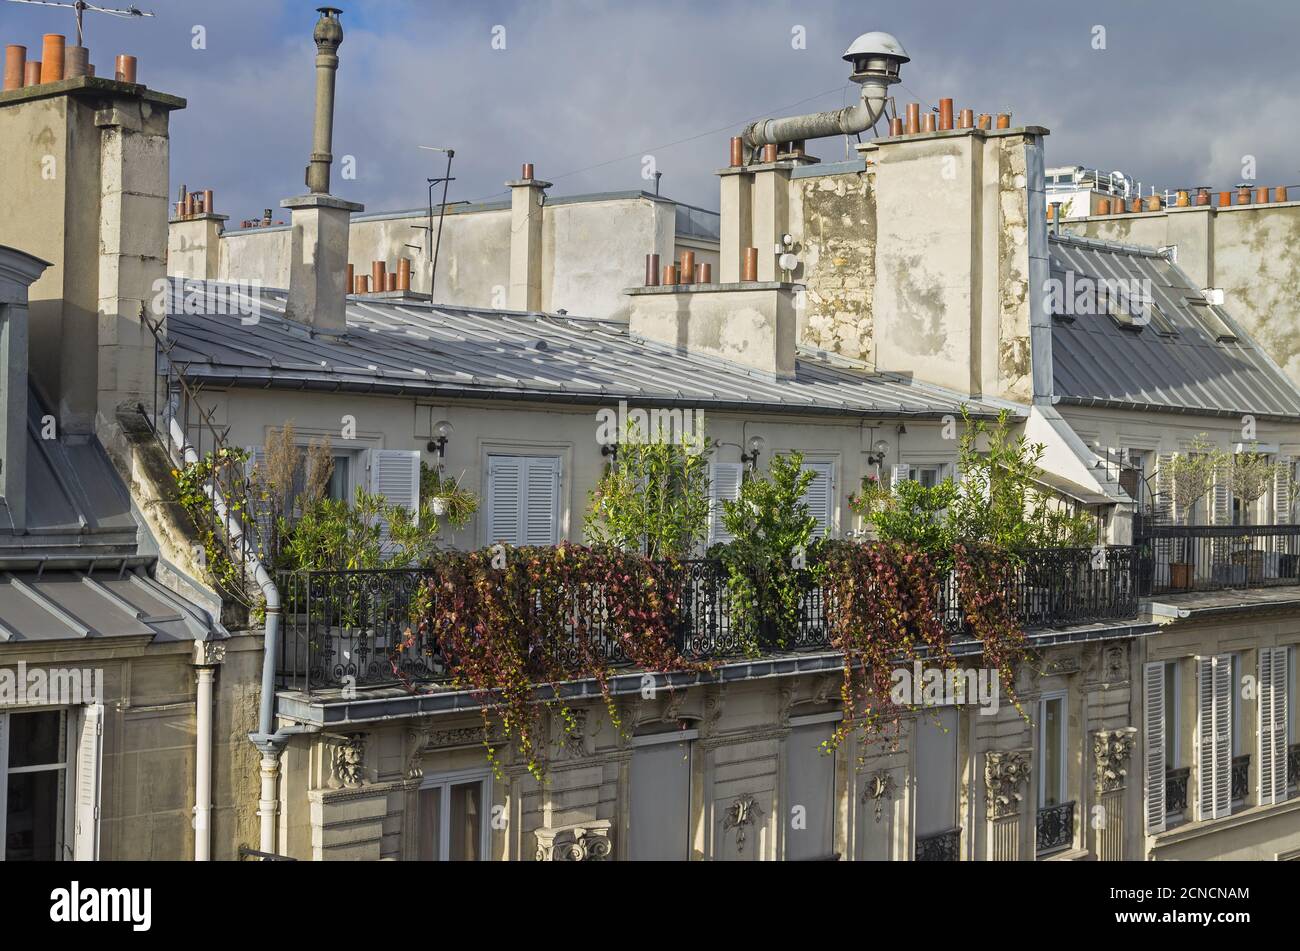 Balcony, decorated with flowers and small shrubs. Stock Photo